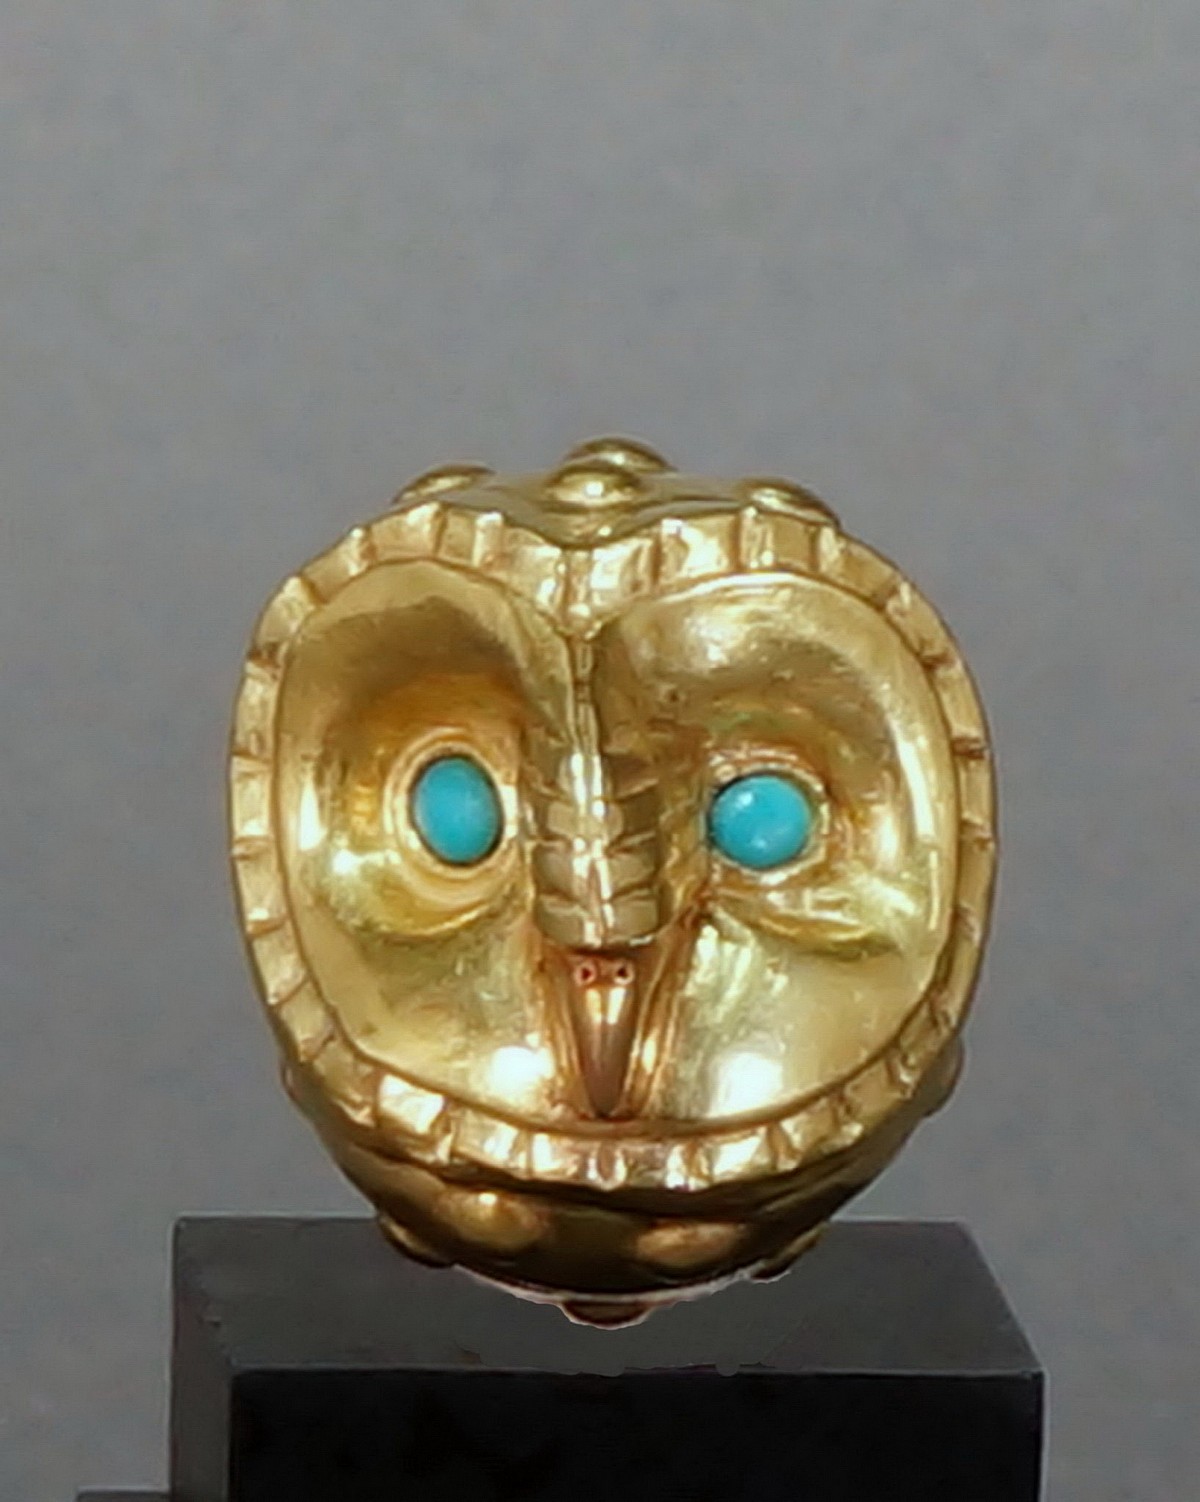 Peru, Moche Small Gold Male Condor Bead with Turquoise Eyes
This gold bead is identifiable as a male eagle by the caruncle on the beak.  The beak itself is crated in a slightly reddish colored gold.  It is made in two parts, expertly soldered.  There are four suspension holes that allow for the bead to be hung upright.  Ex Collection Benno Mattel, prior to 1970, by decent to his daughter Karin Ashburn.
Media: Metal
Dimensions: Height: 3.3cm x Depth: 3.2cm x Weight:10.2 grams
$5,000
n8021